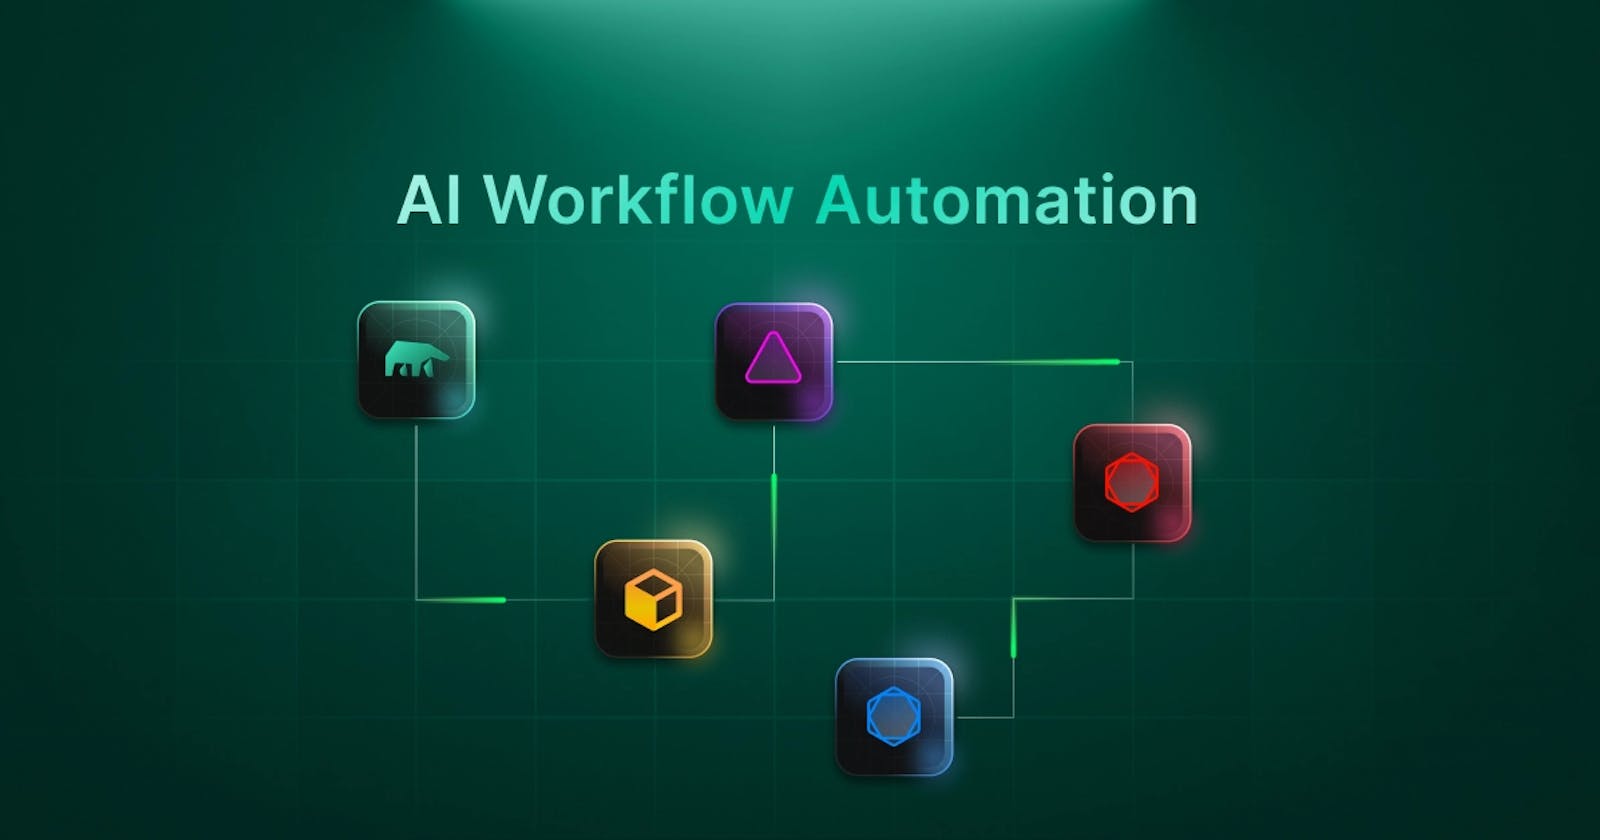 Cover Image for AI Workflow Automation Patterns using MindsDB's Jobs